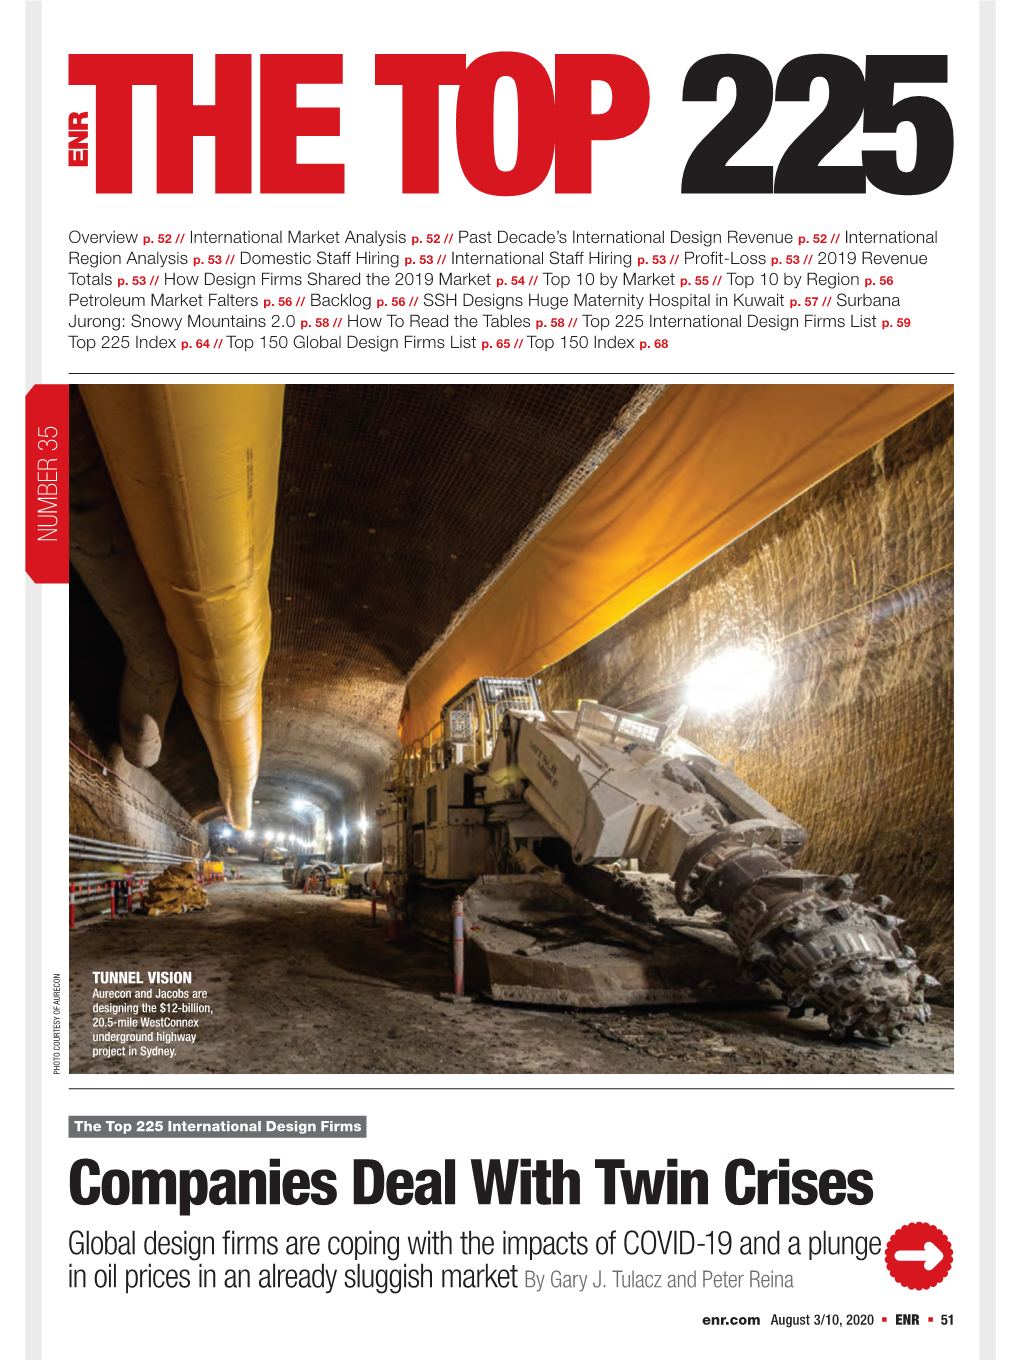 Companies Deal with Twin Crises Global Design Firms Are Coping with the Impacts of COVID-19 and a Plunge in Oil Prices in an Already Sluggish Market by Gary J